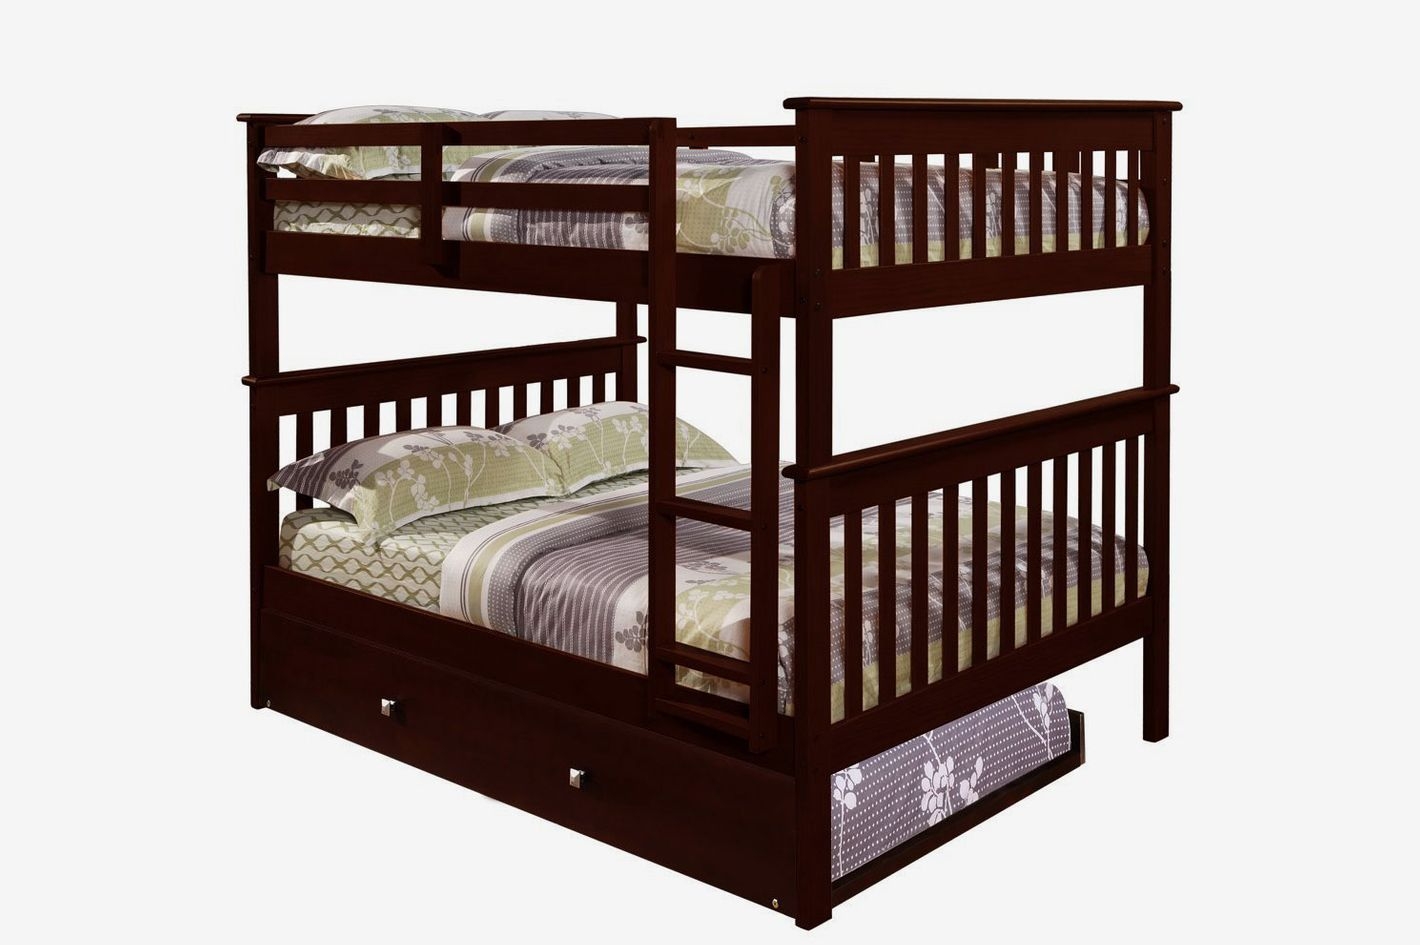 bunk beds with double bed on bottom